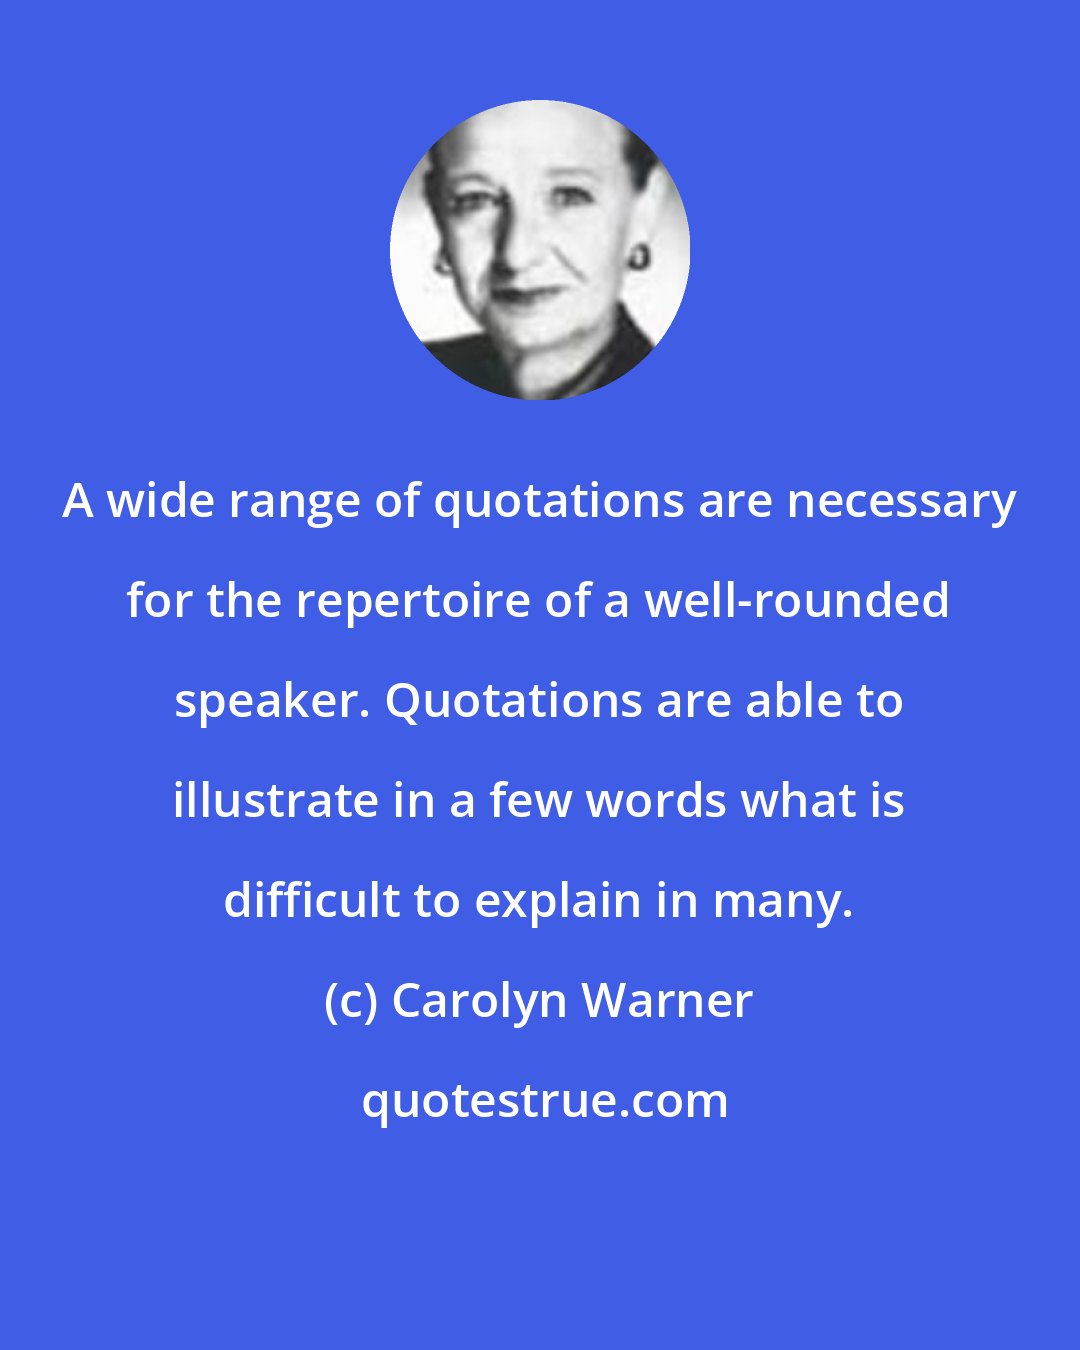 Carolyn Warner: A wide range of quotations are necessary for the repertoire of a well-rounded speaker. Quotations are able to illustrate in a few words what is difficult to explain in many.